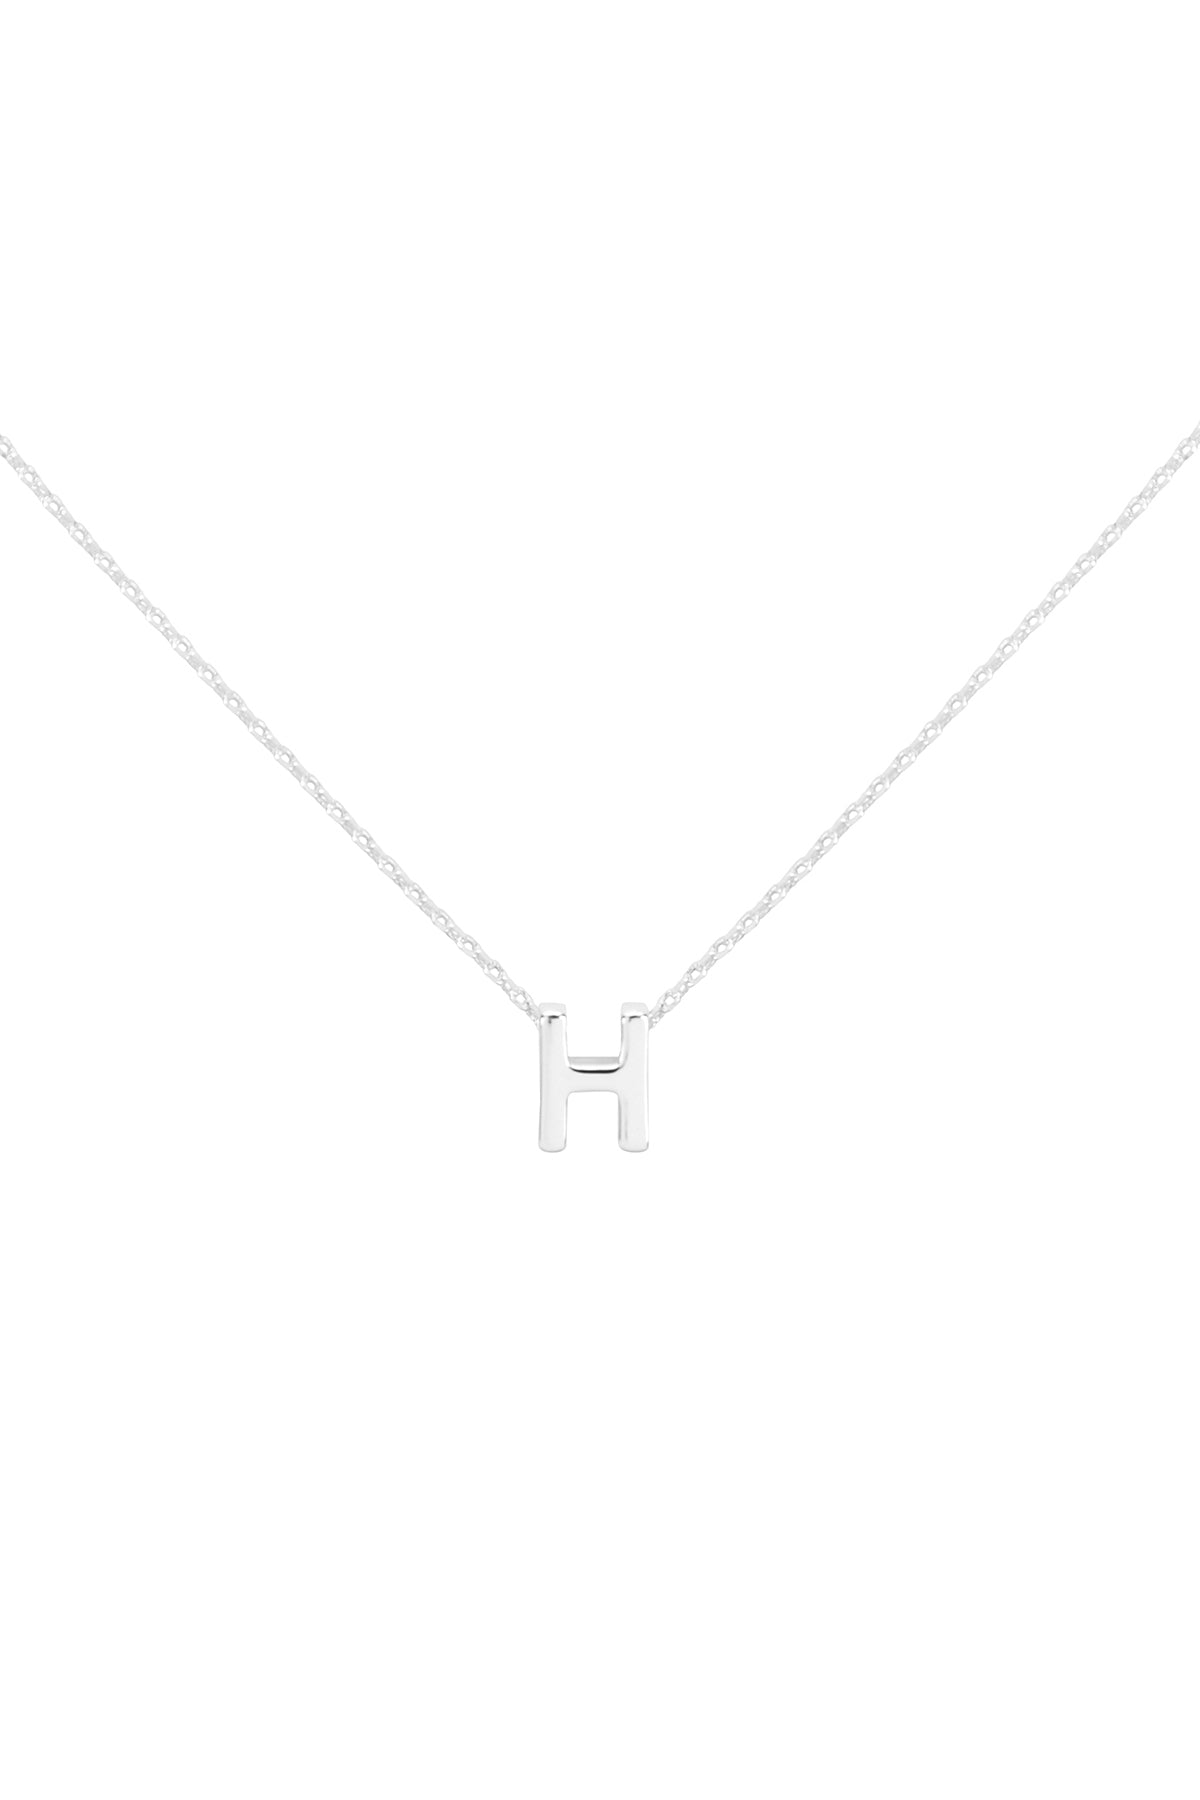 "H" INITIAL DAINTY CHARM NECKLACE